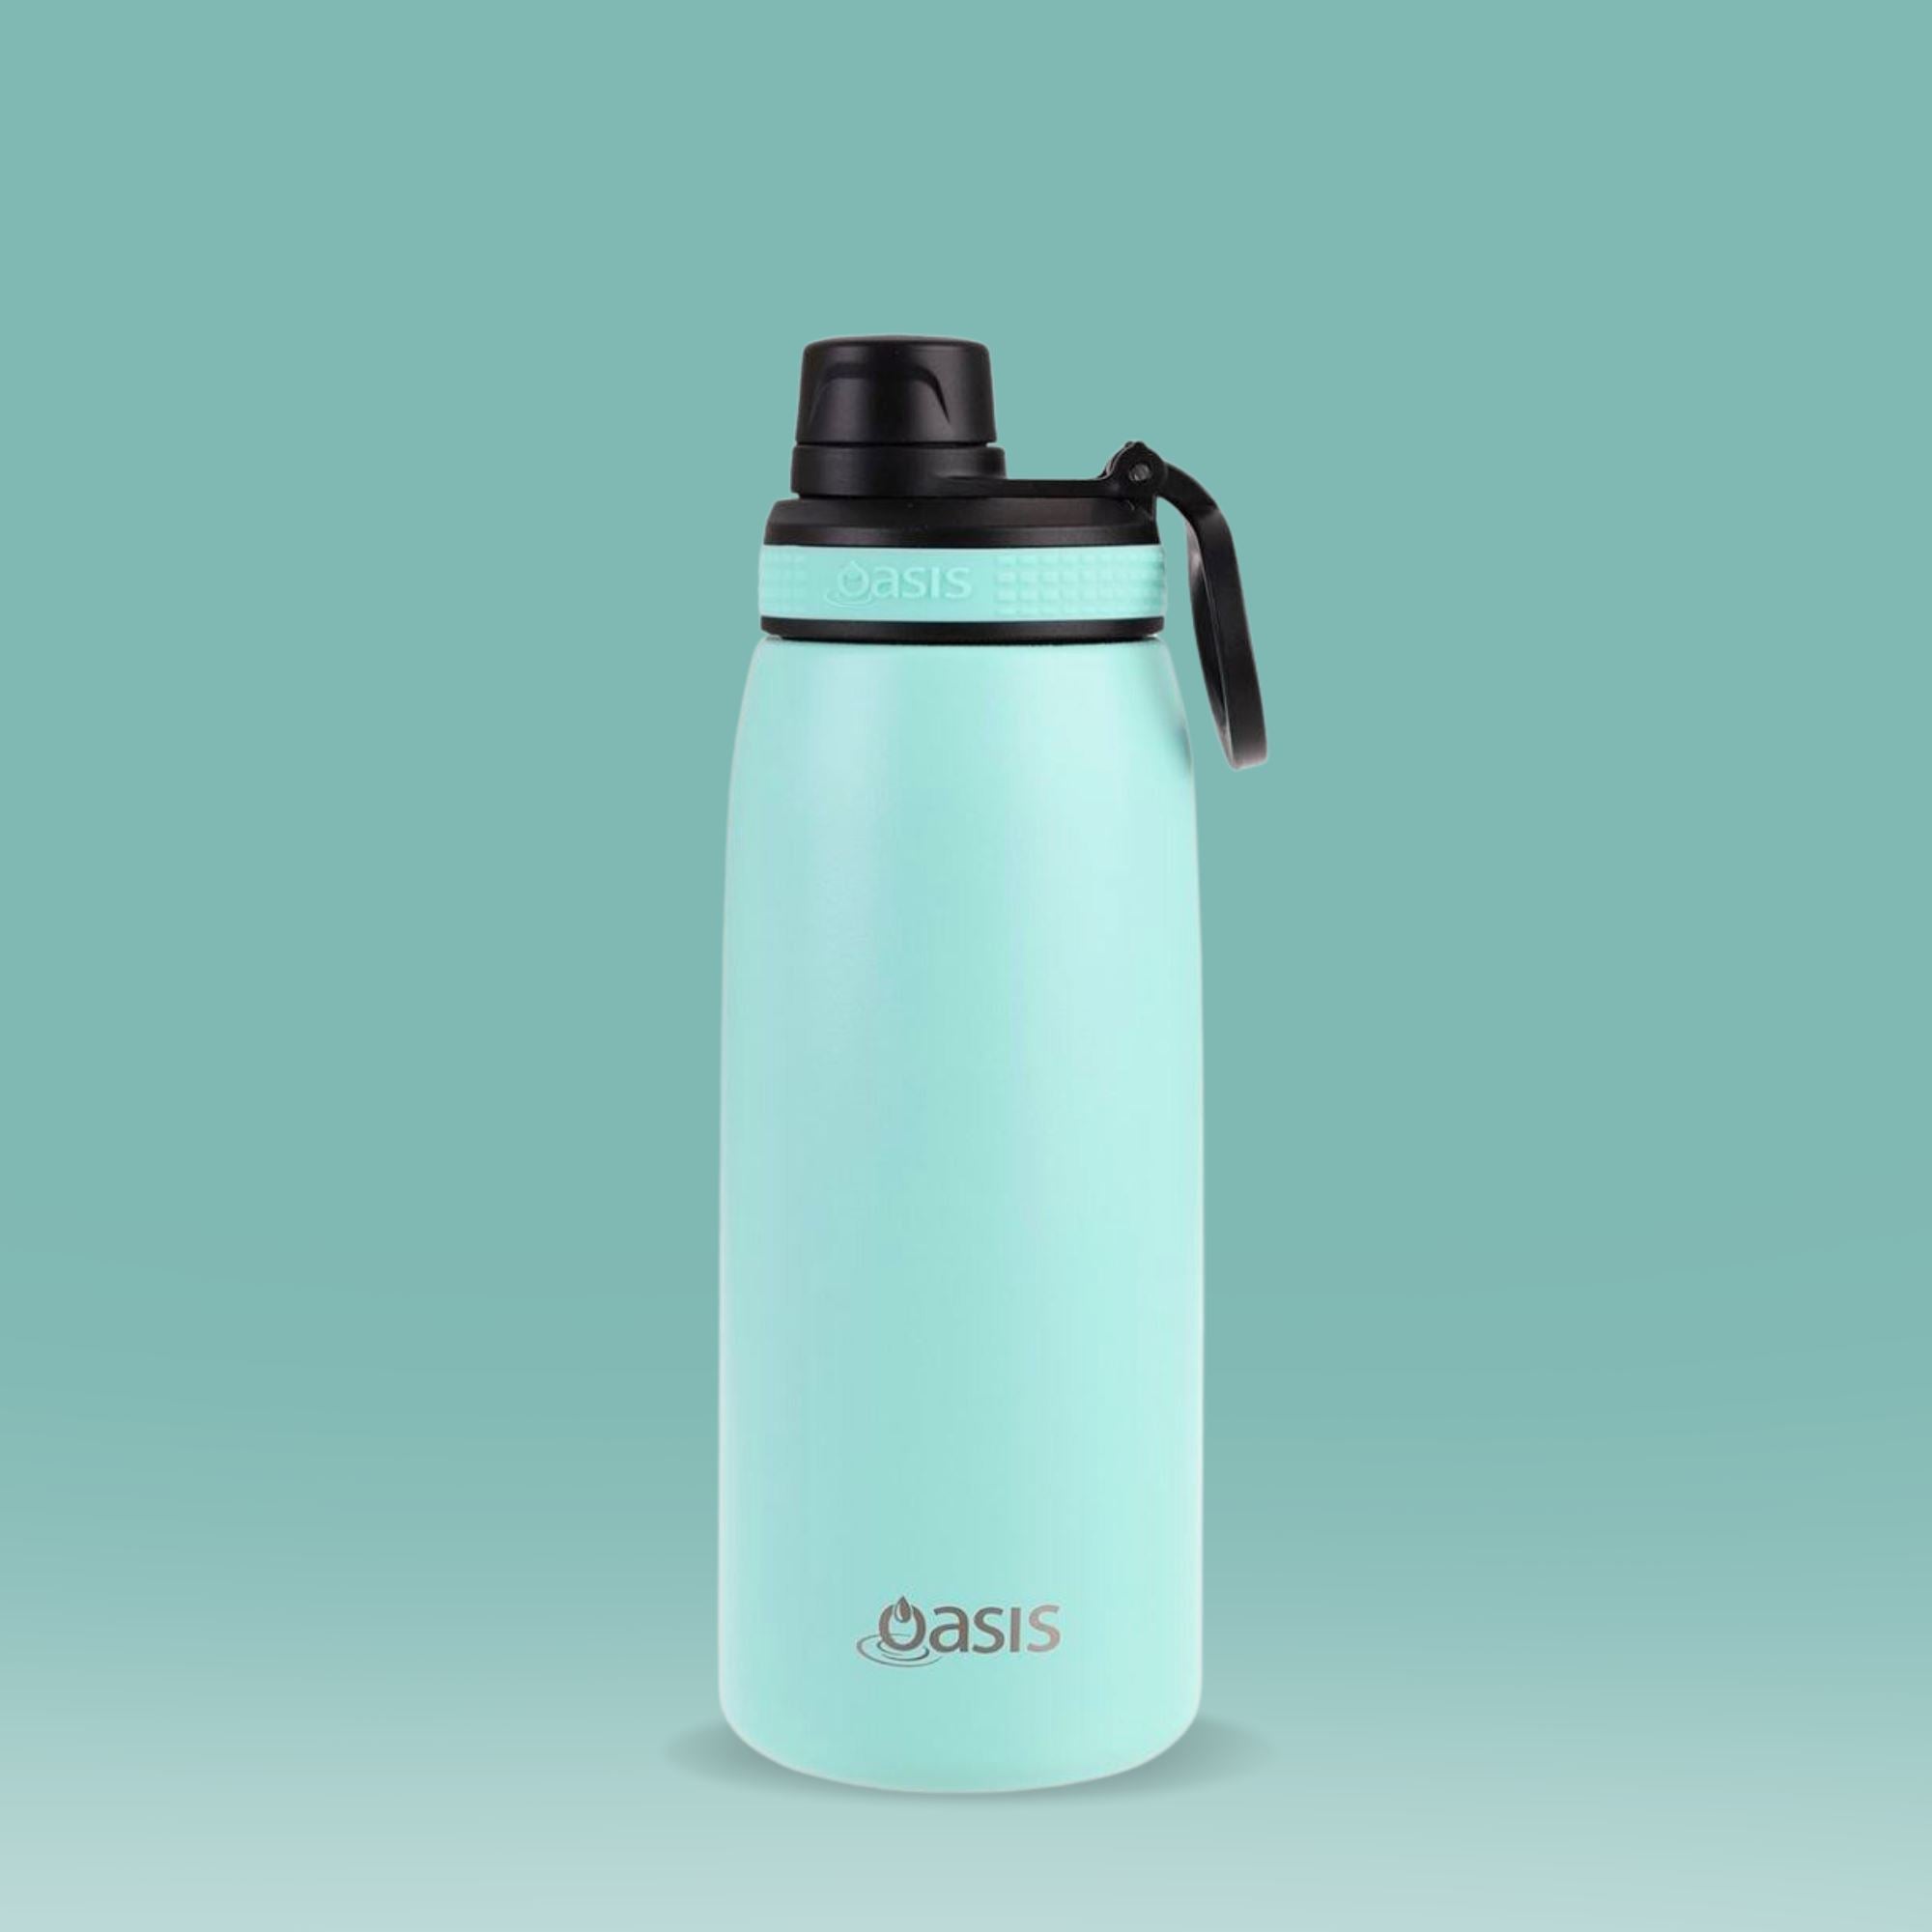 Insulated Sports Bottle Mint 780ml Drinkware Oasis 